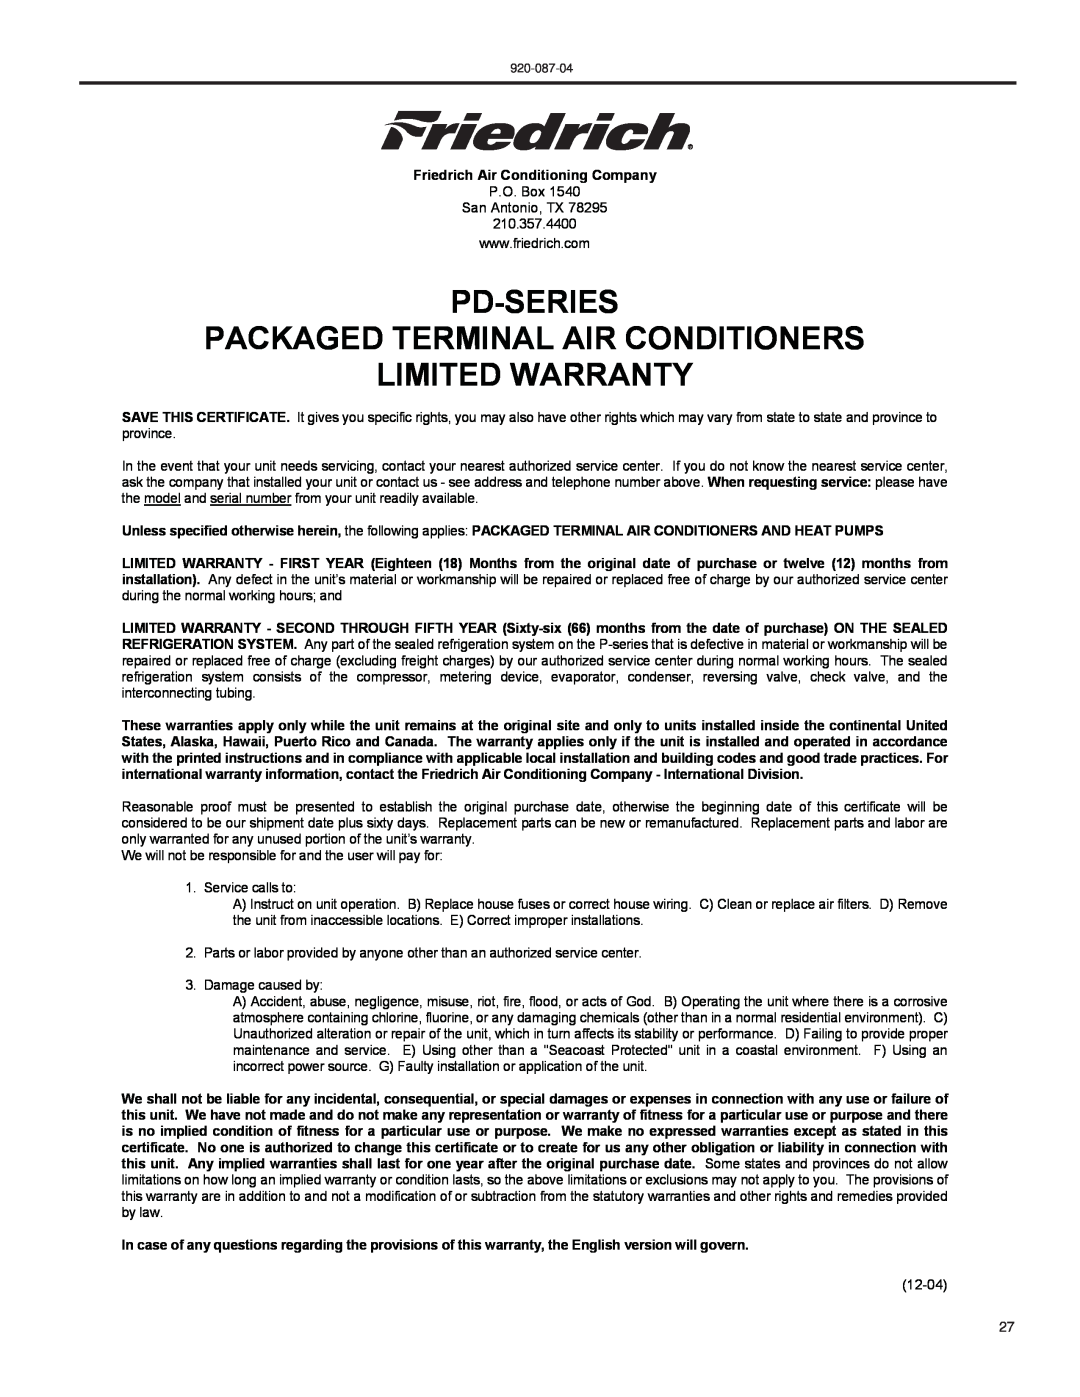 Friedrich HEAT PUMPS manual Pd-Series Packaged Terminal Air Conditioners, Limited Warranty 